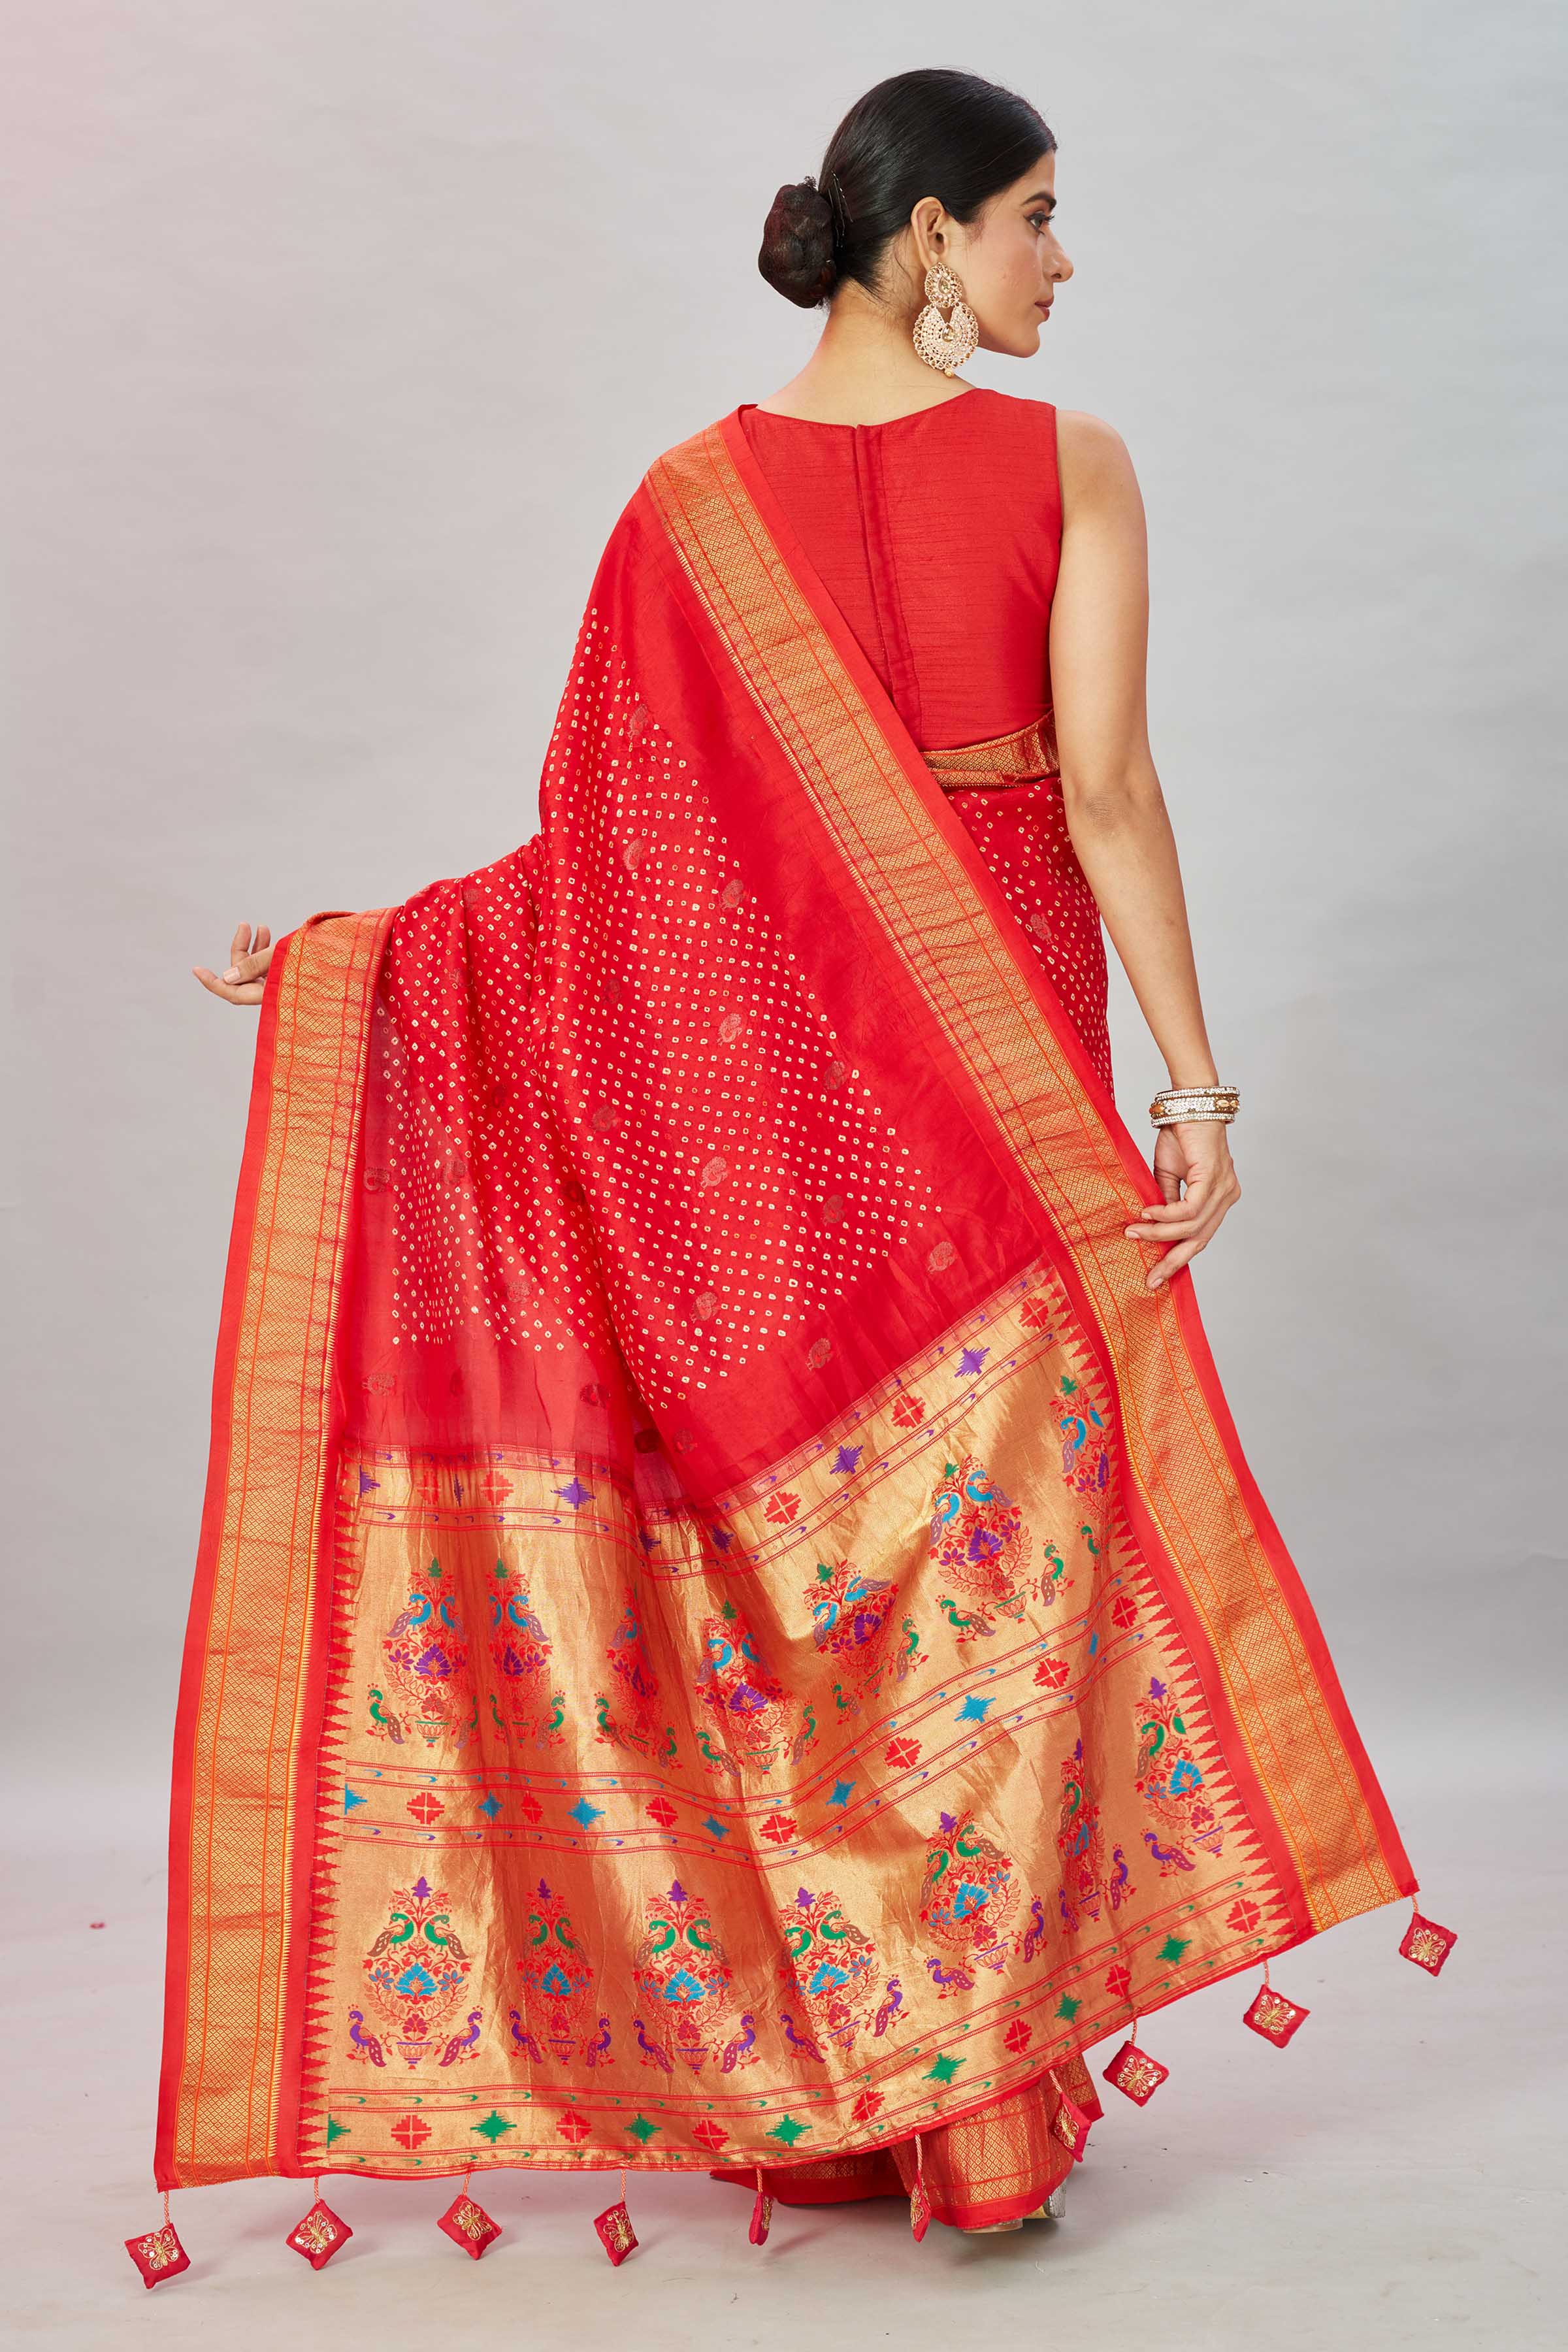 Shop red bandhej Kanjivaram silk sari online in USA with Paithani pallu. Look your best on festive occasions in latest designer sarees, pure silk sarees, Kanjivaram silk saris, handwoven saris, tussar silk sarees, embroidered saris from Pure Elegance Indian clothing store in USA.-back